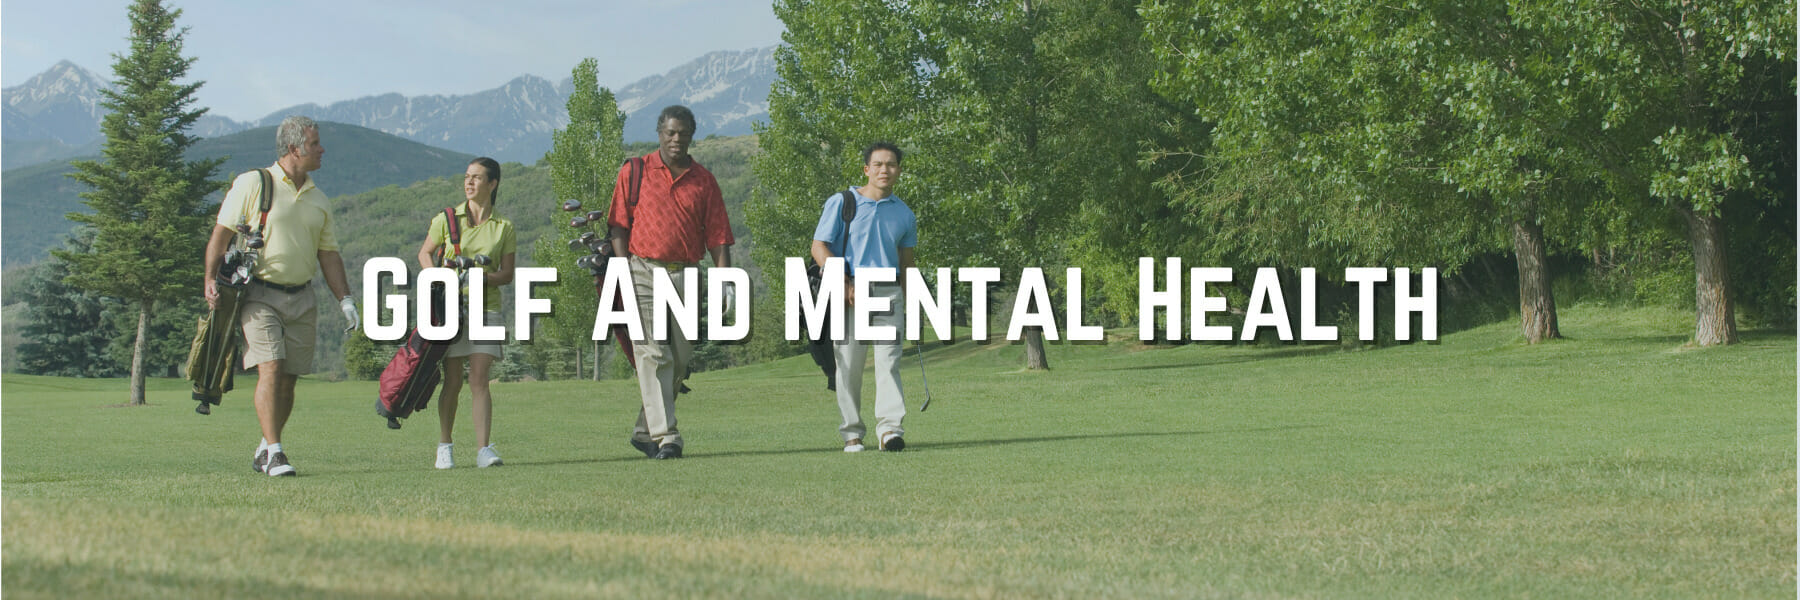 Golf And Mental Health